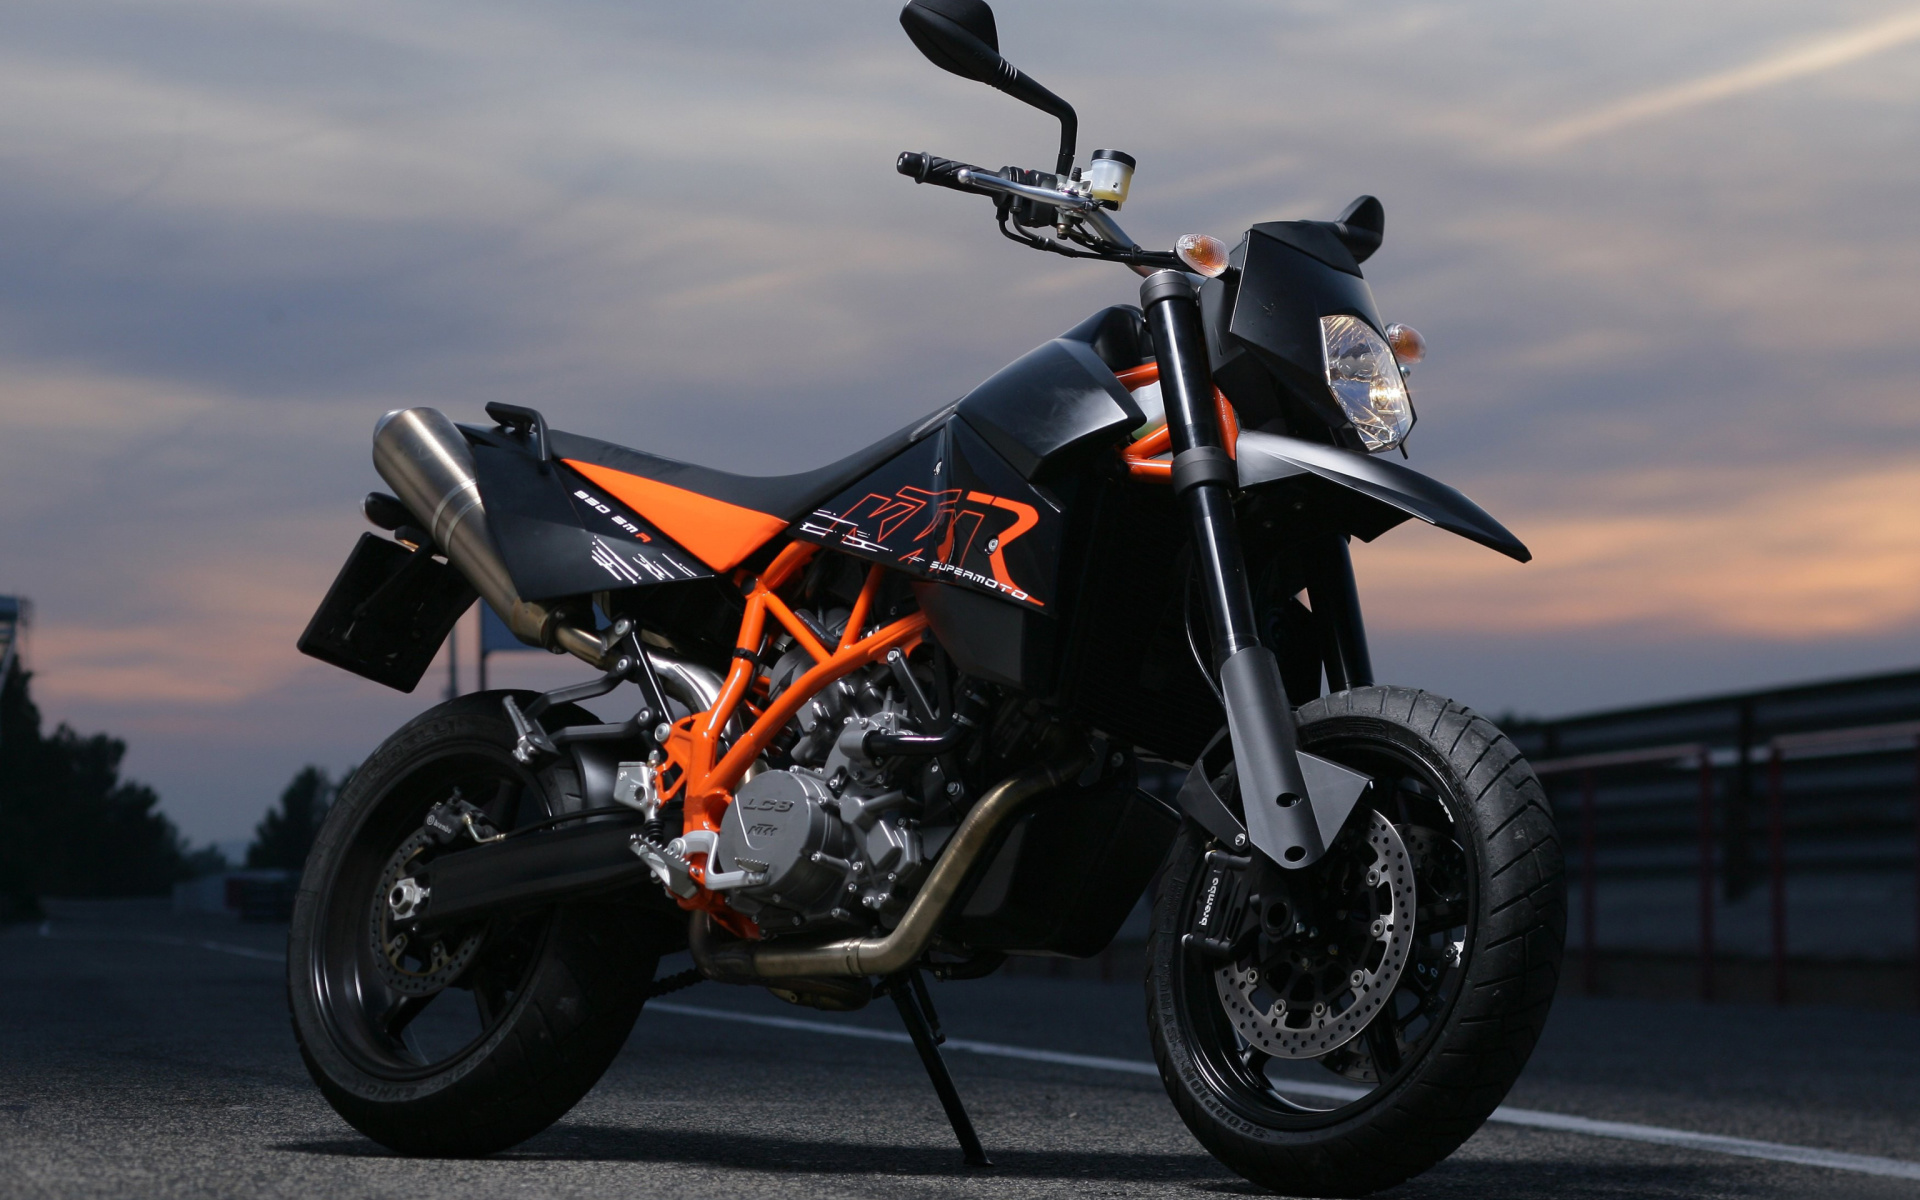 Supermoto: KTM 950 SM, Off-road motorcycles, The largest motorcycle manufacturer in Europe. 1920x1200 HD Wallpaper.